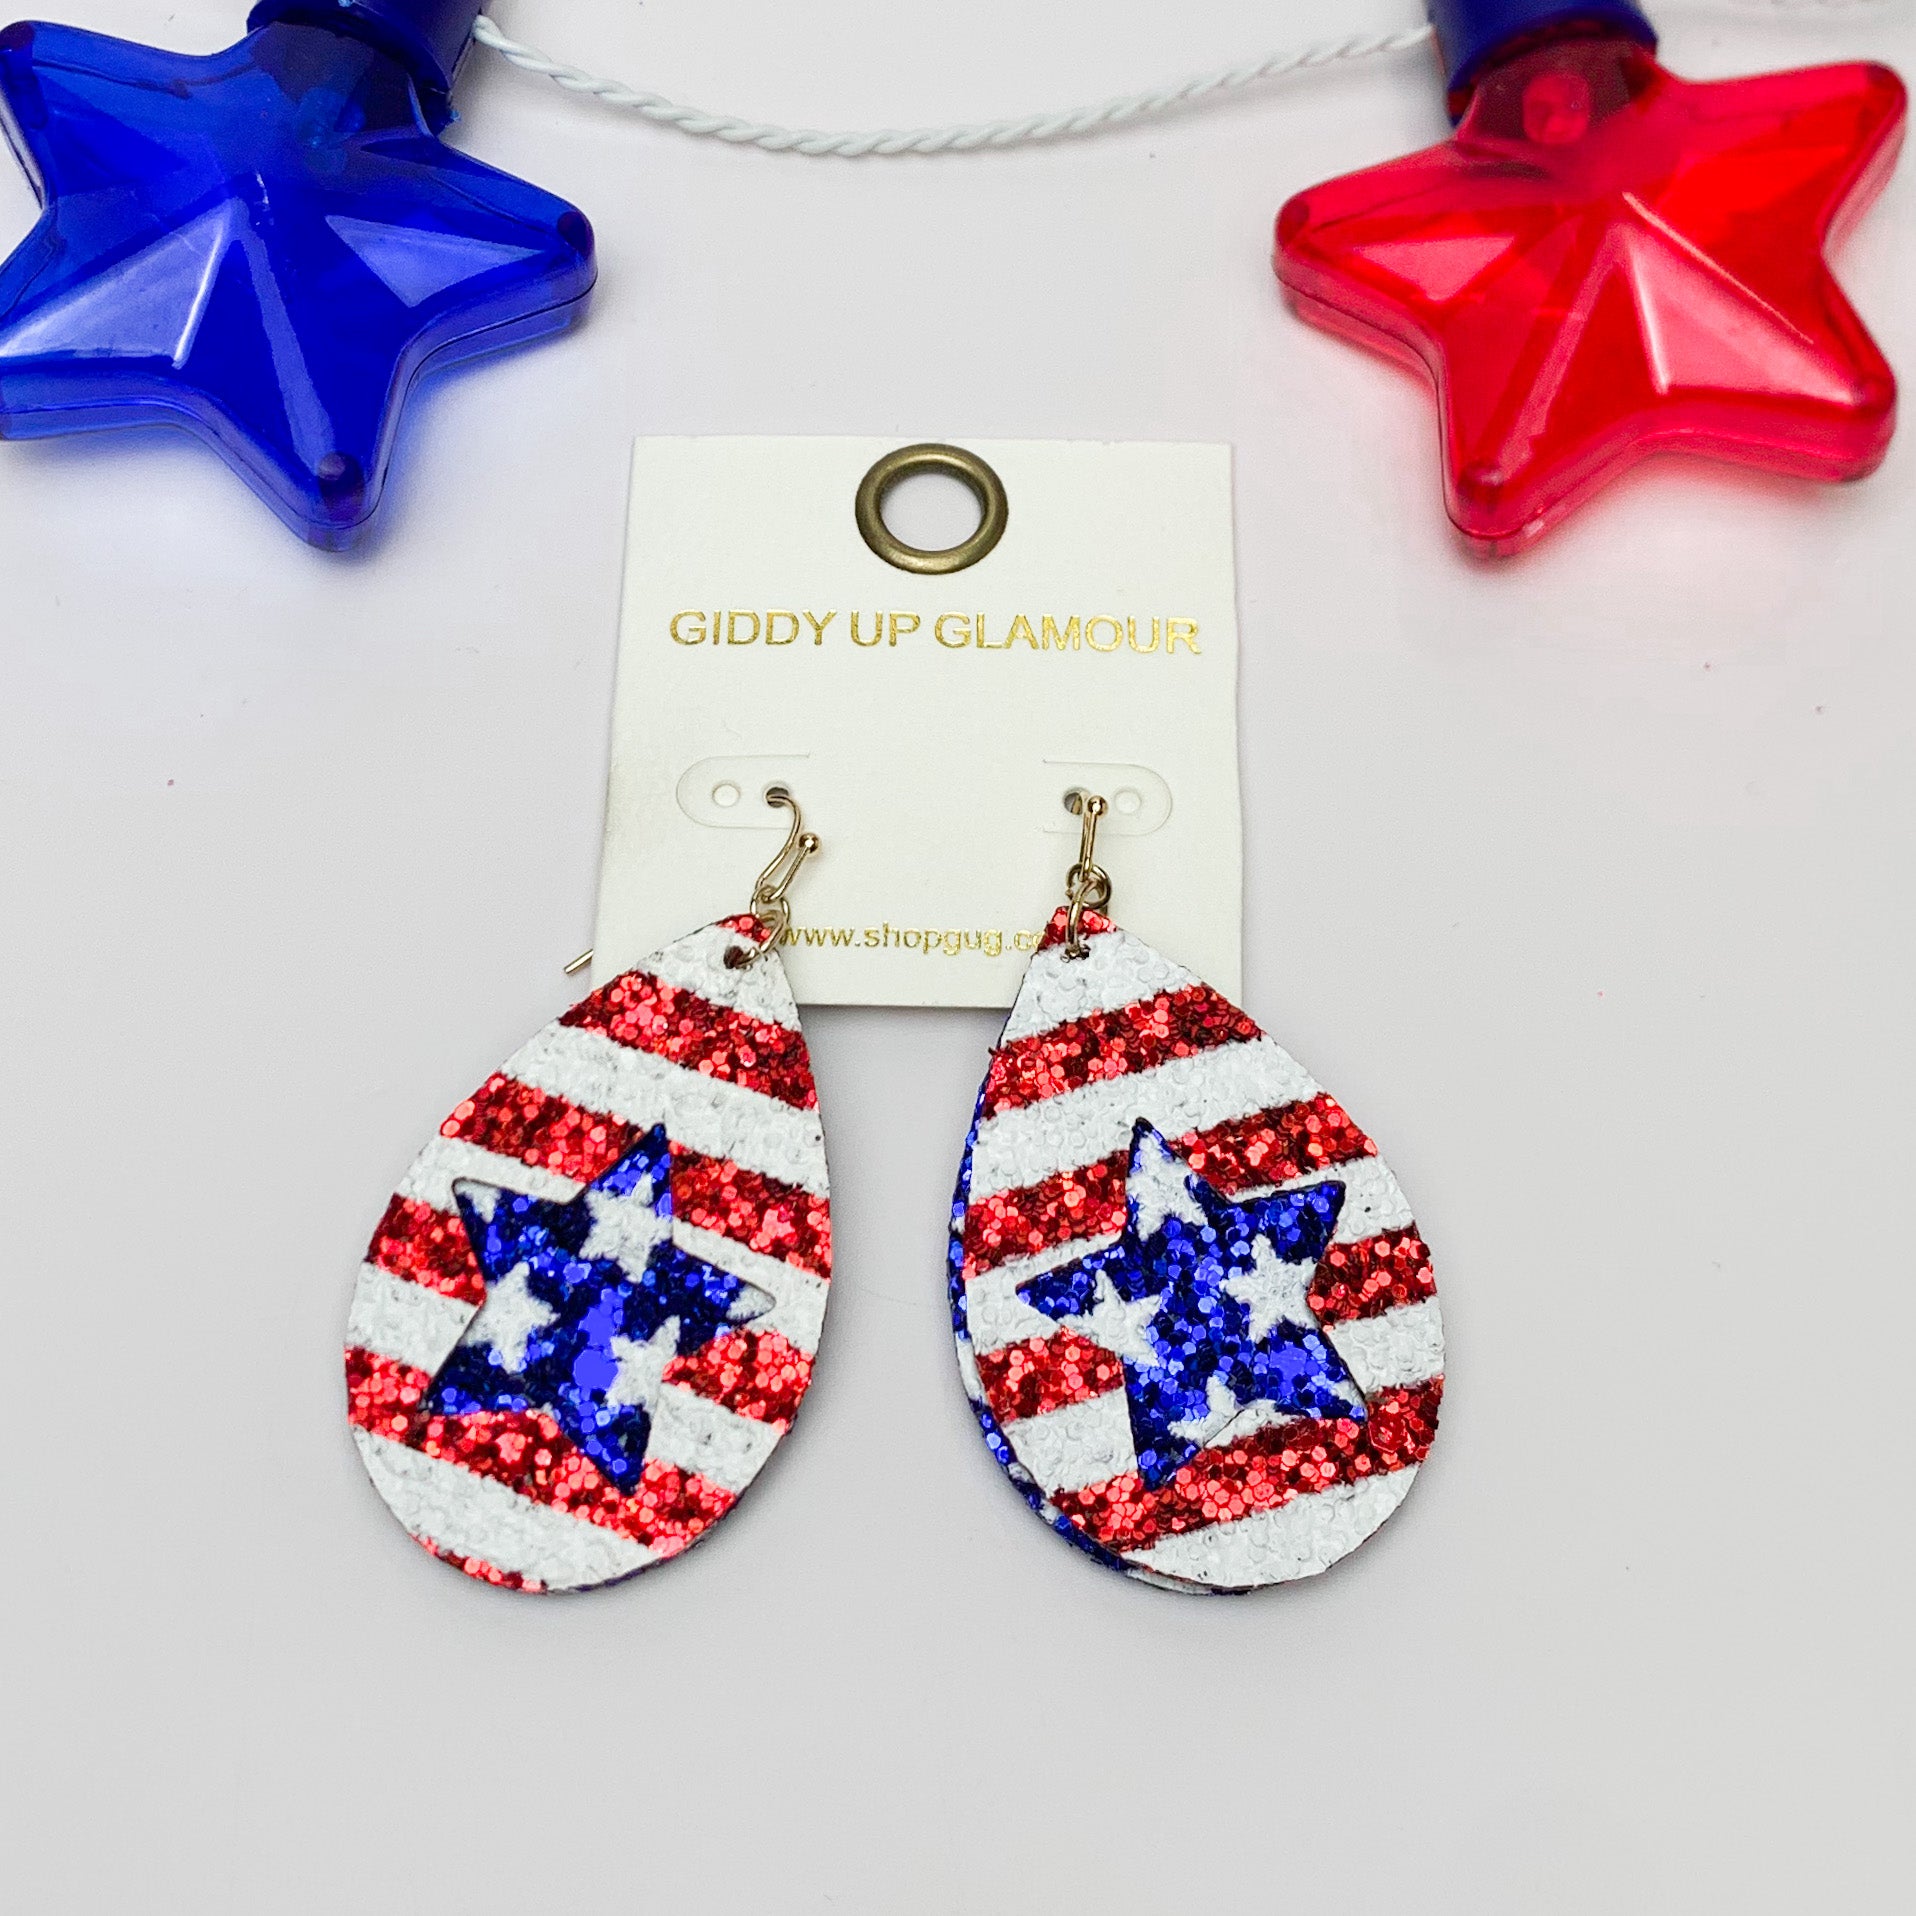 Star Cutout Glitter Patriotic Teardrop Earrings. Pictured on a white background with a red and blue star at the top for decoration.